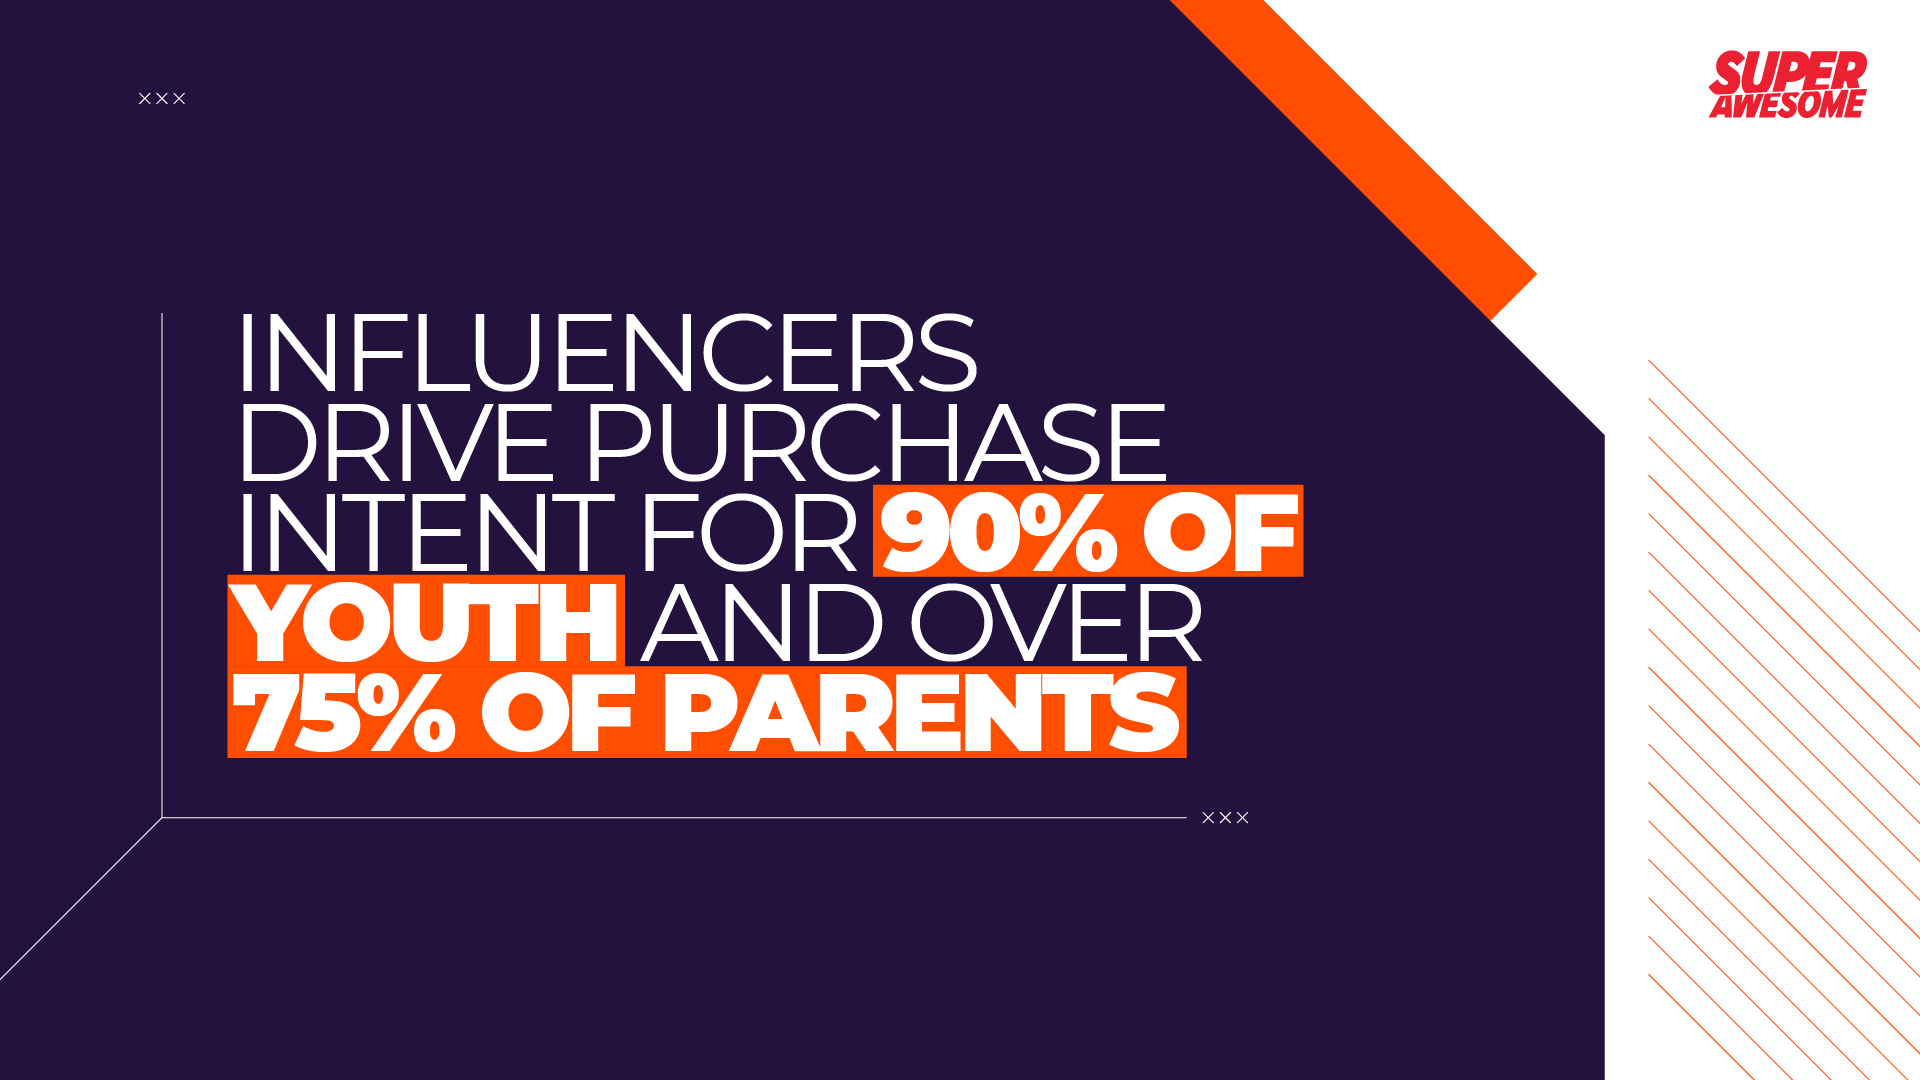 Influencers drive purchase intent for 90% of youth and over 75% of parents